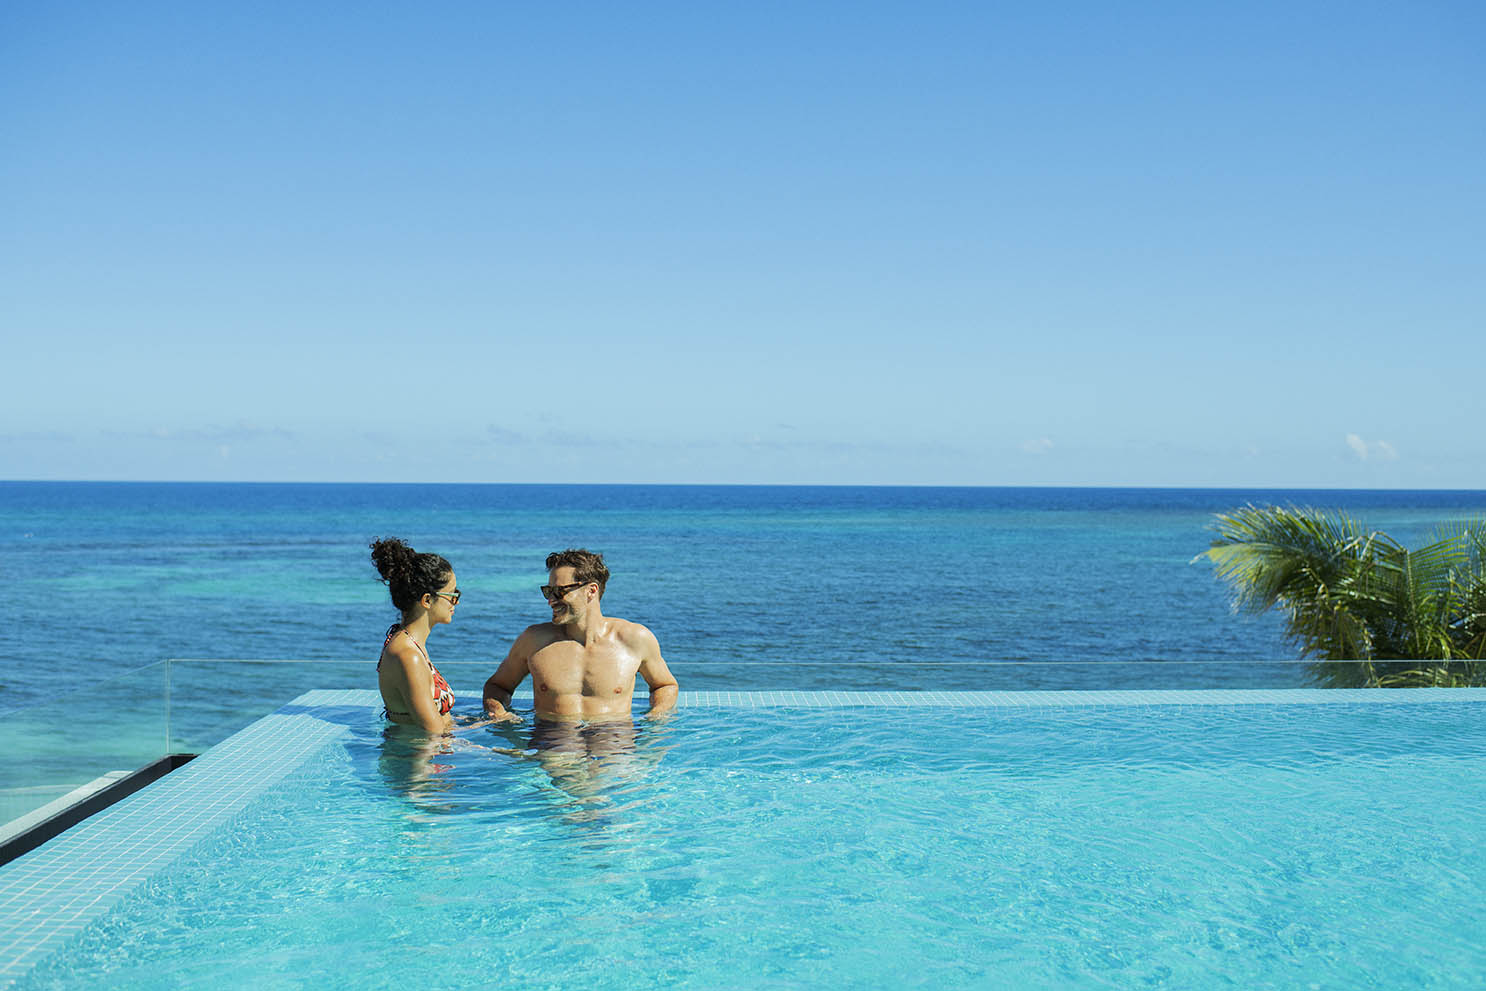 Which Are The Most Romantic All Inclusive Hotels in The Caribbean?